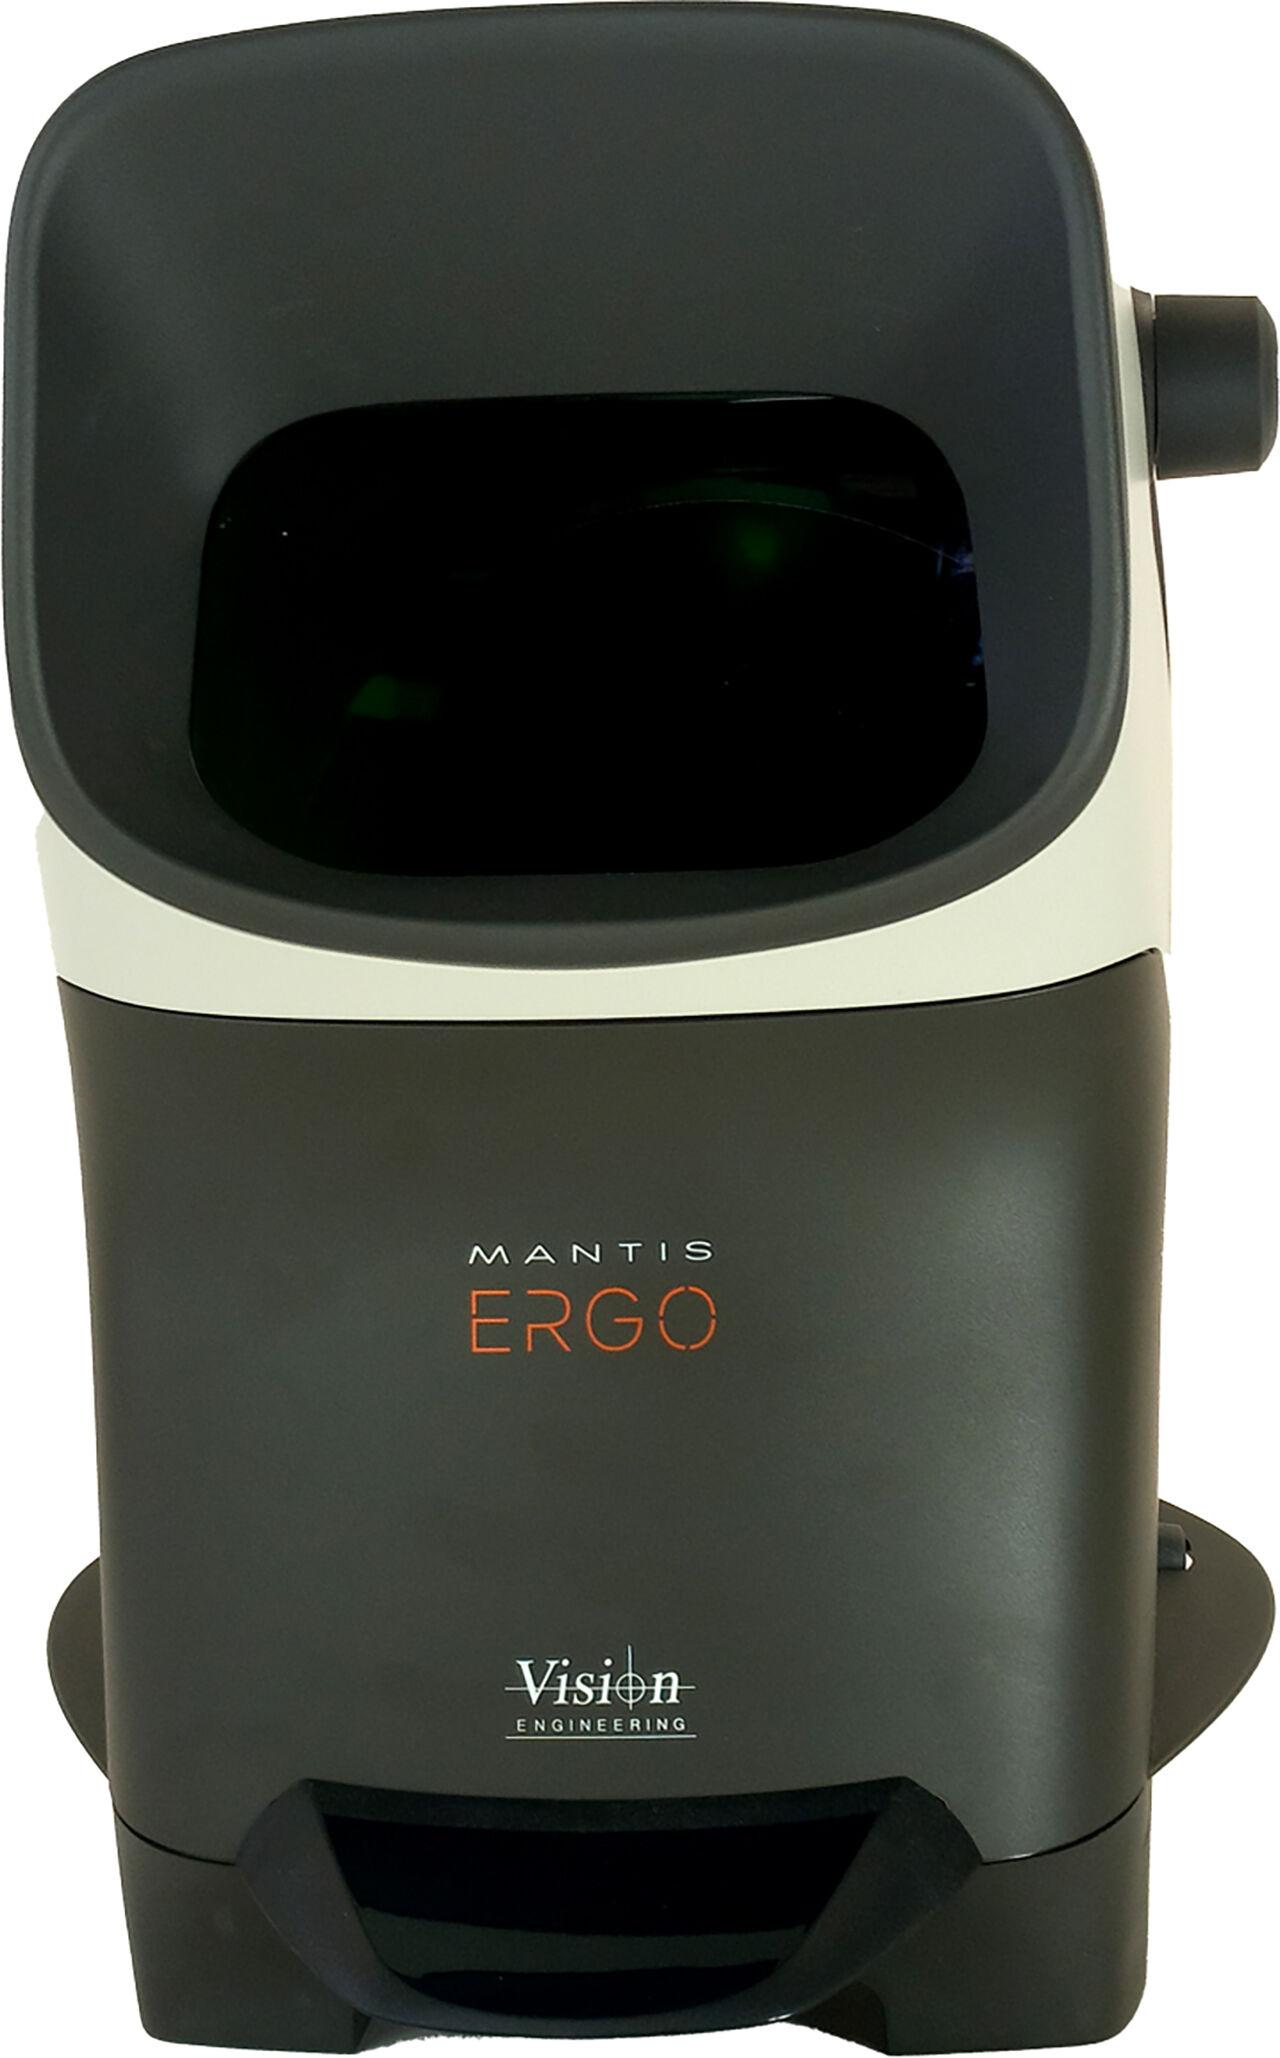 ERGO Head - Stereo optical head with expanded exit pupil technology